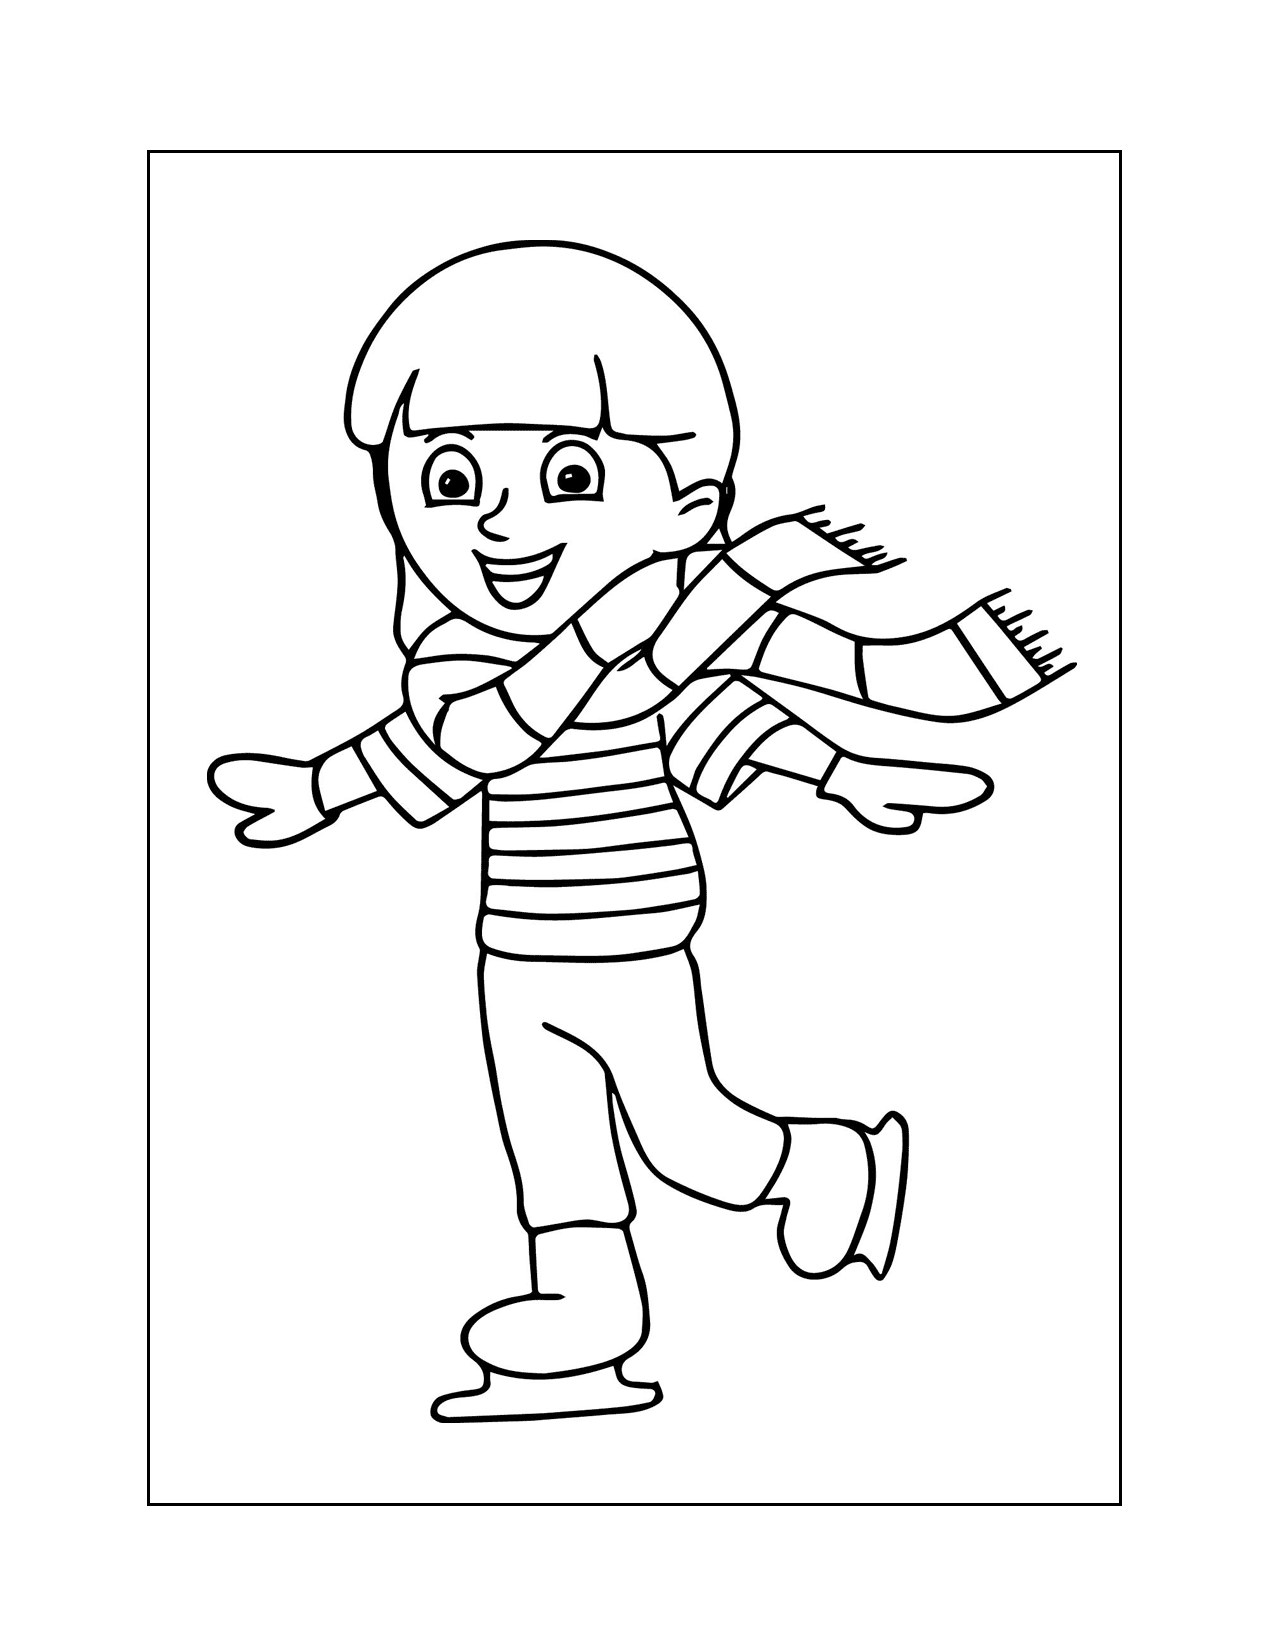 Smiling Girl Ice Skating Coloring Page